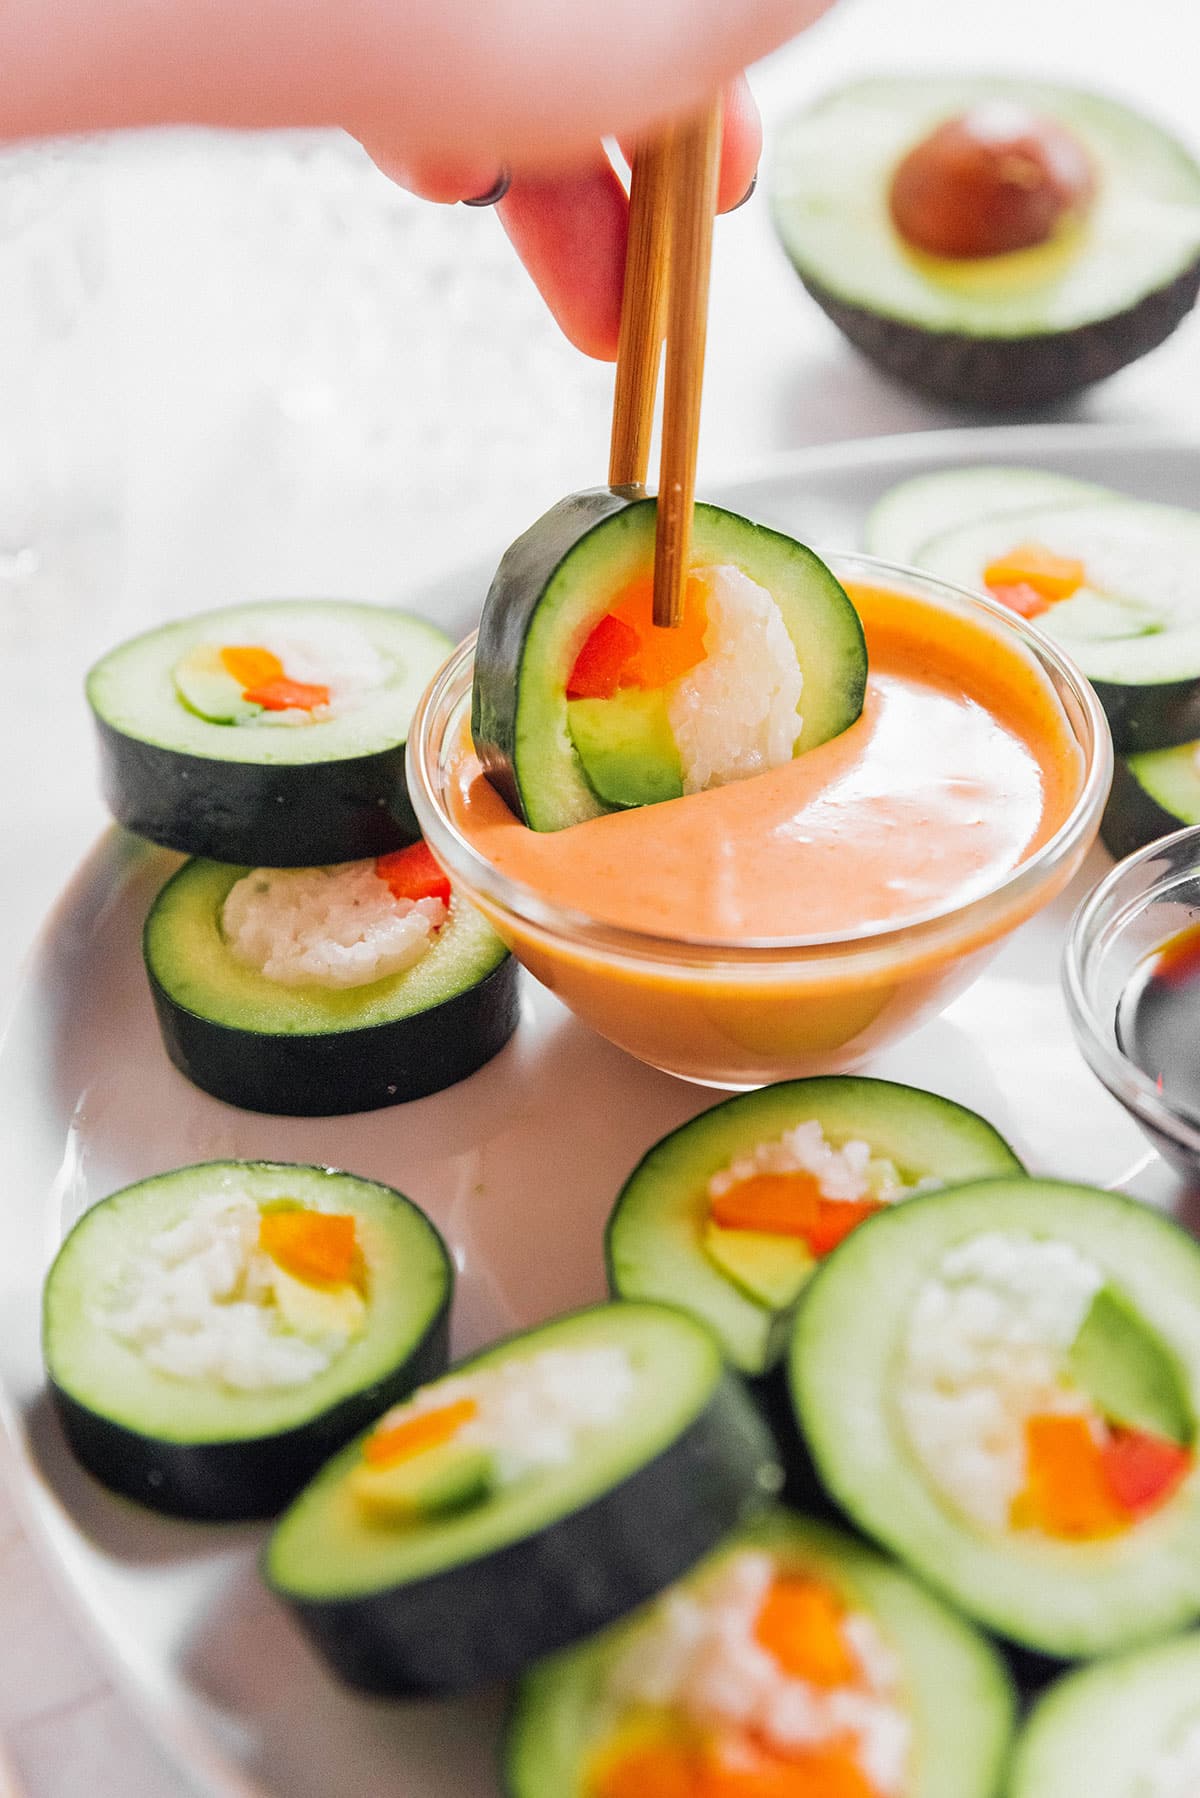 Dipping stuffed cucumber into spicy mayo